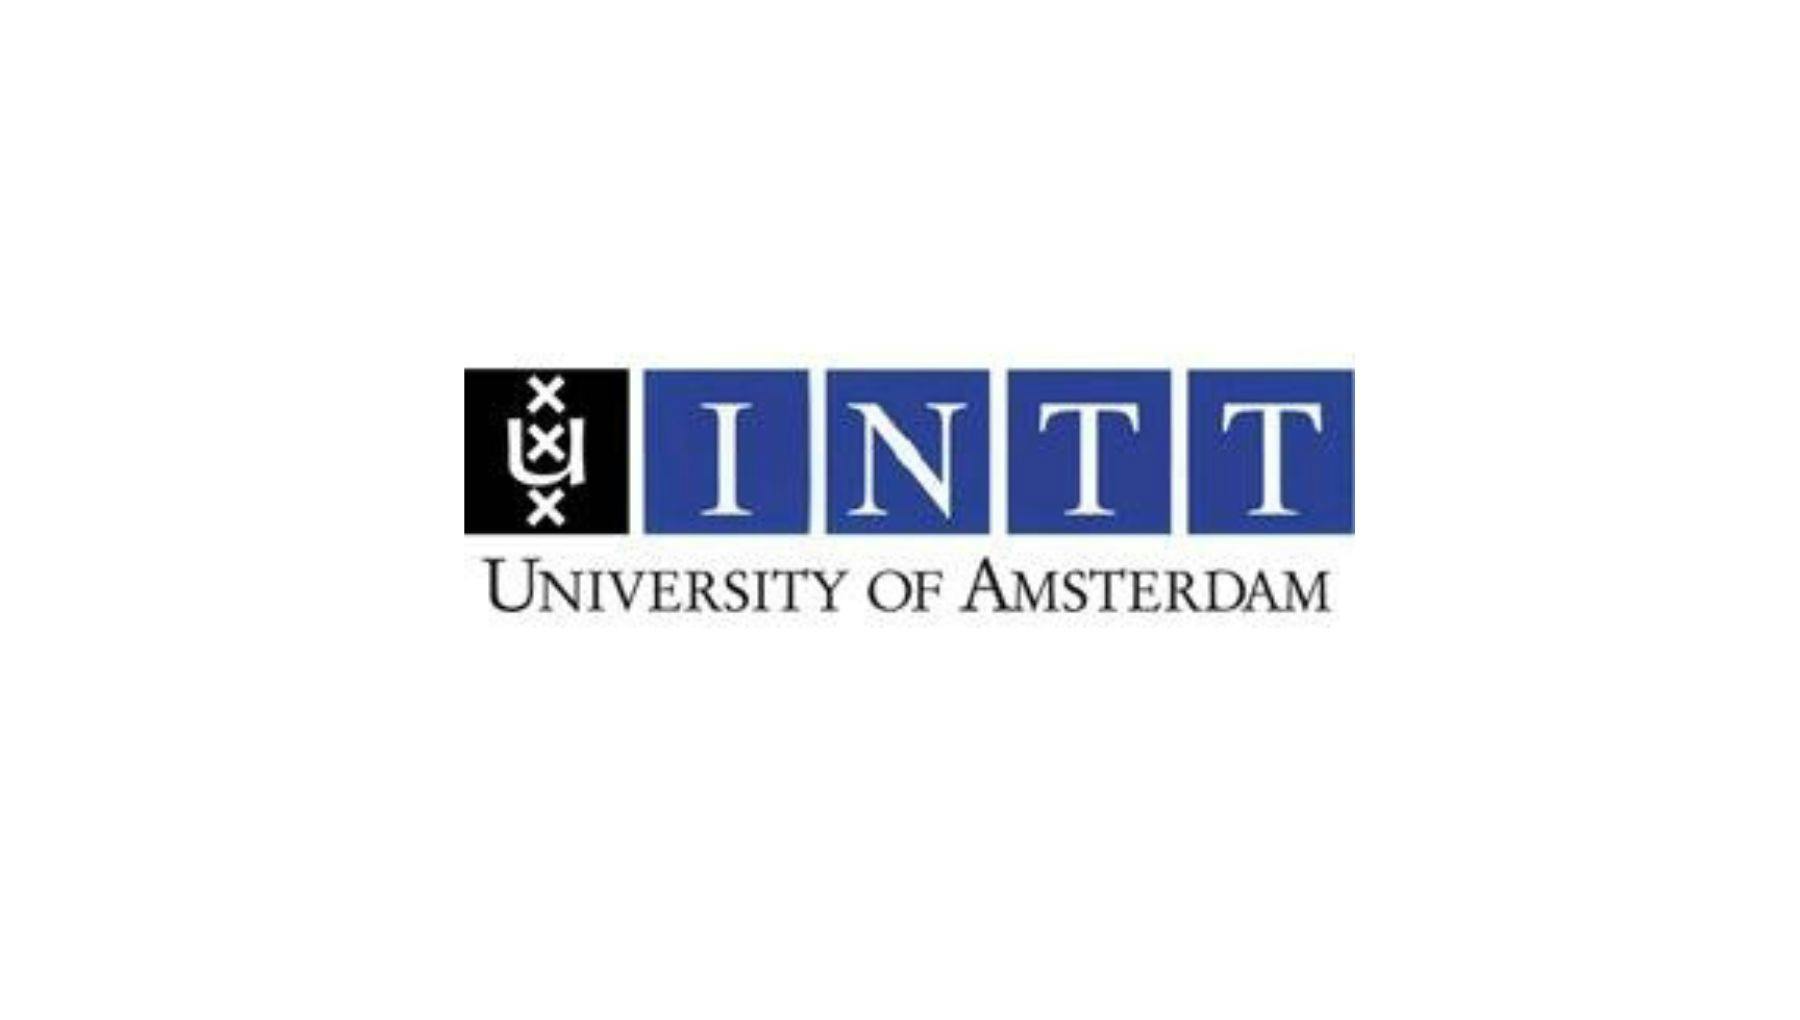 INTT – Institute for Dutch Language Education at the University of Amsterdam